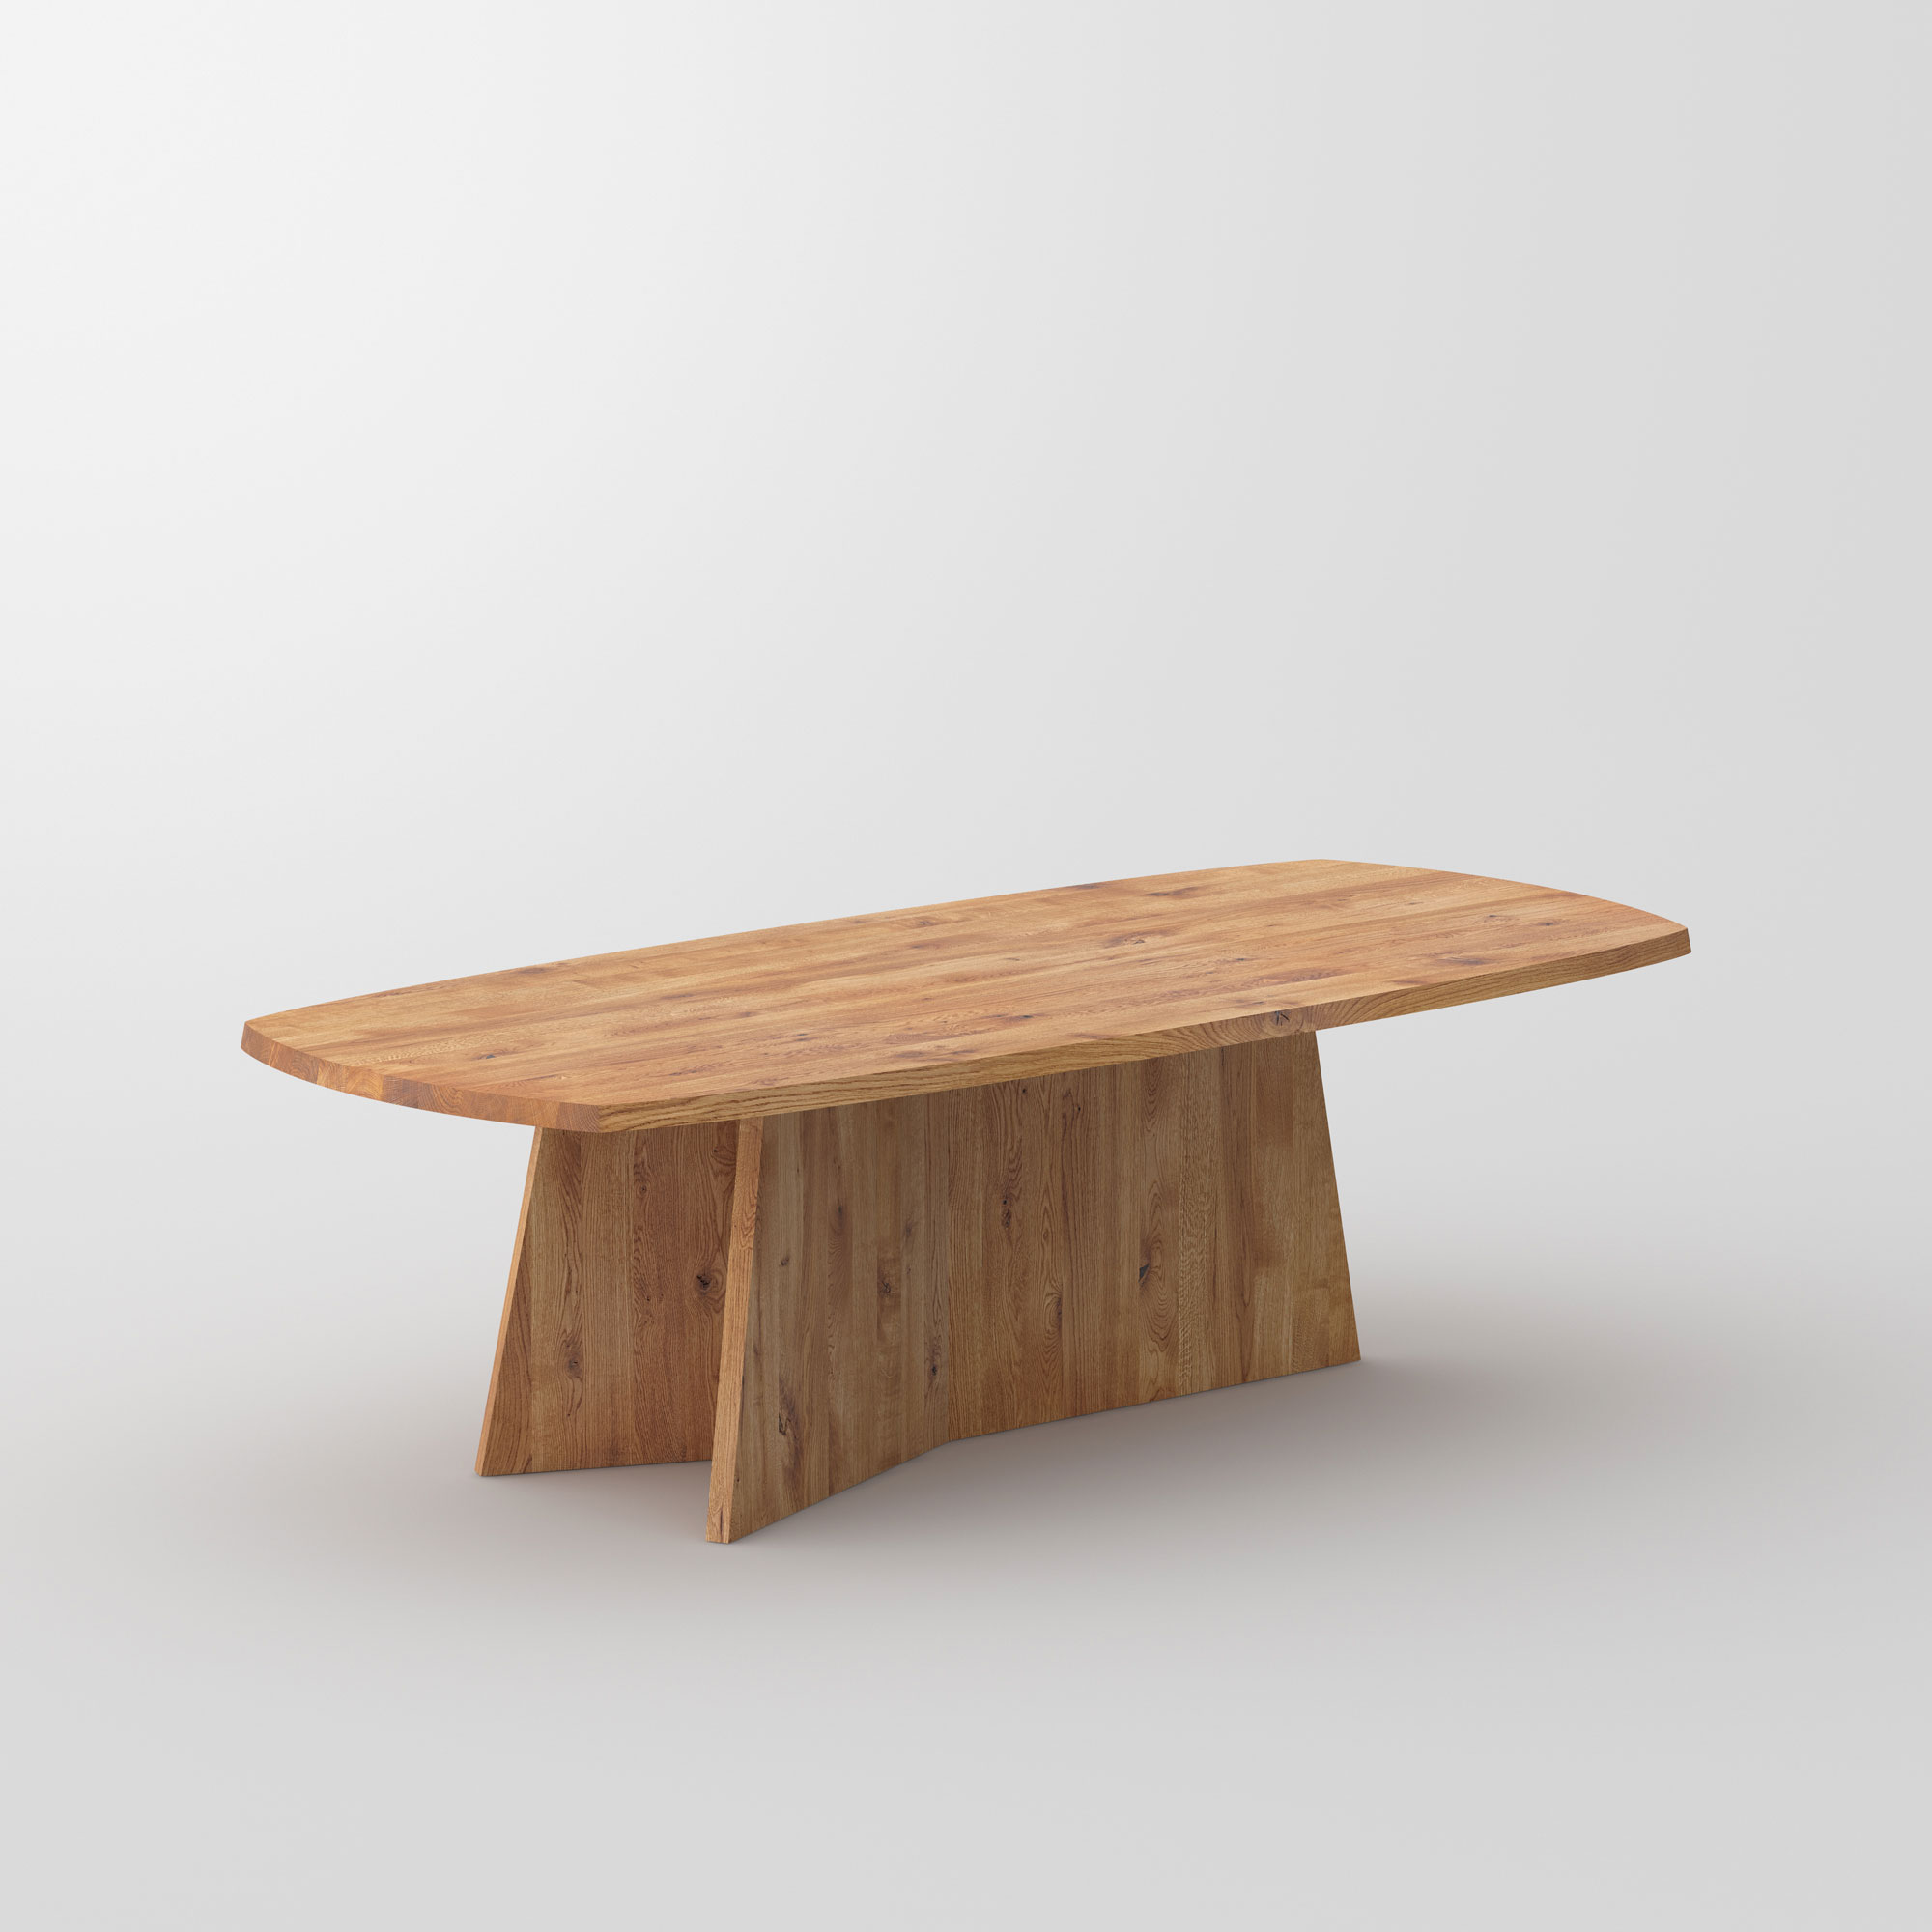 Design Dining Table LOTUS cam1 custom made in solid wood by vitamin design